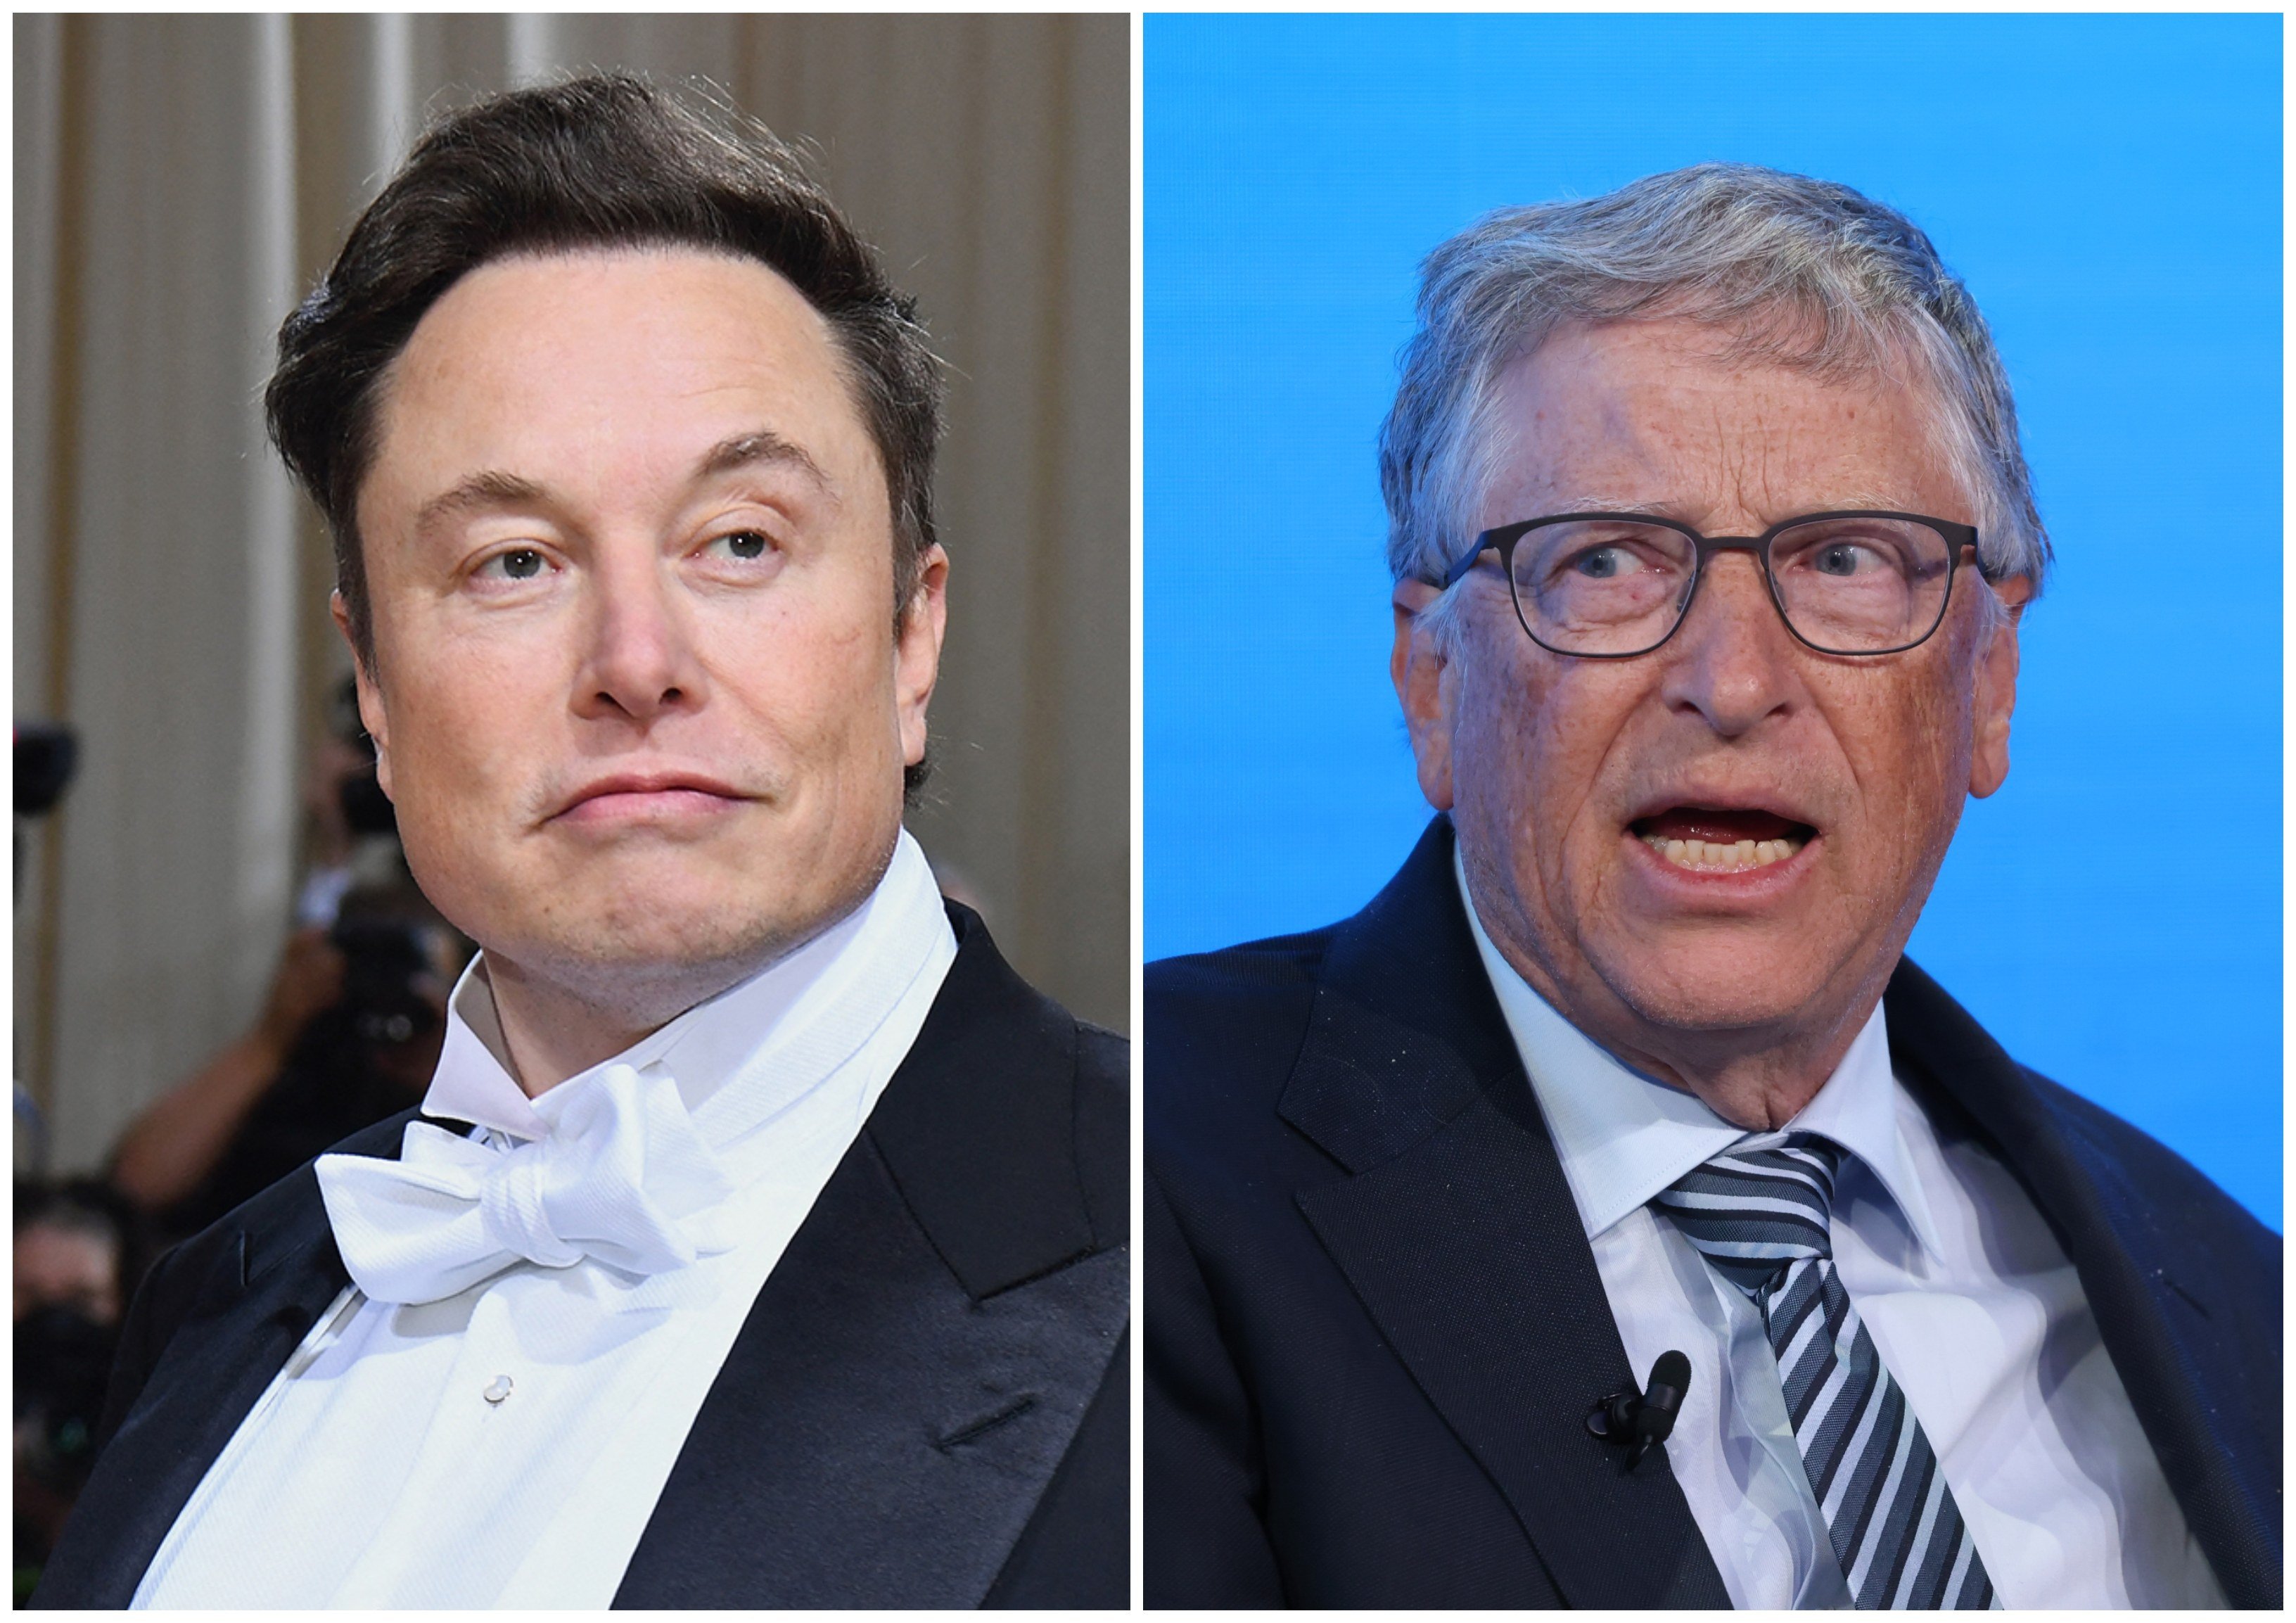 Tesla’s Elon Musk and Microsoft’s Bill Gates have had plenty to argue about over the years. Photos: Getty, Bloomberg